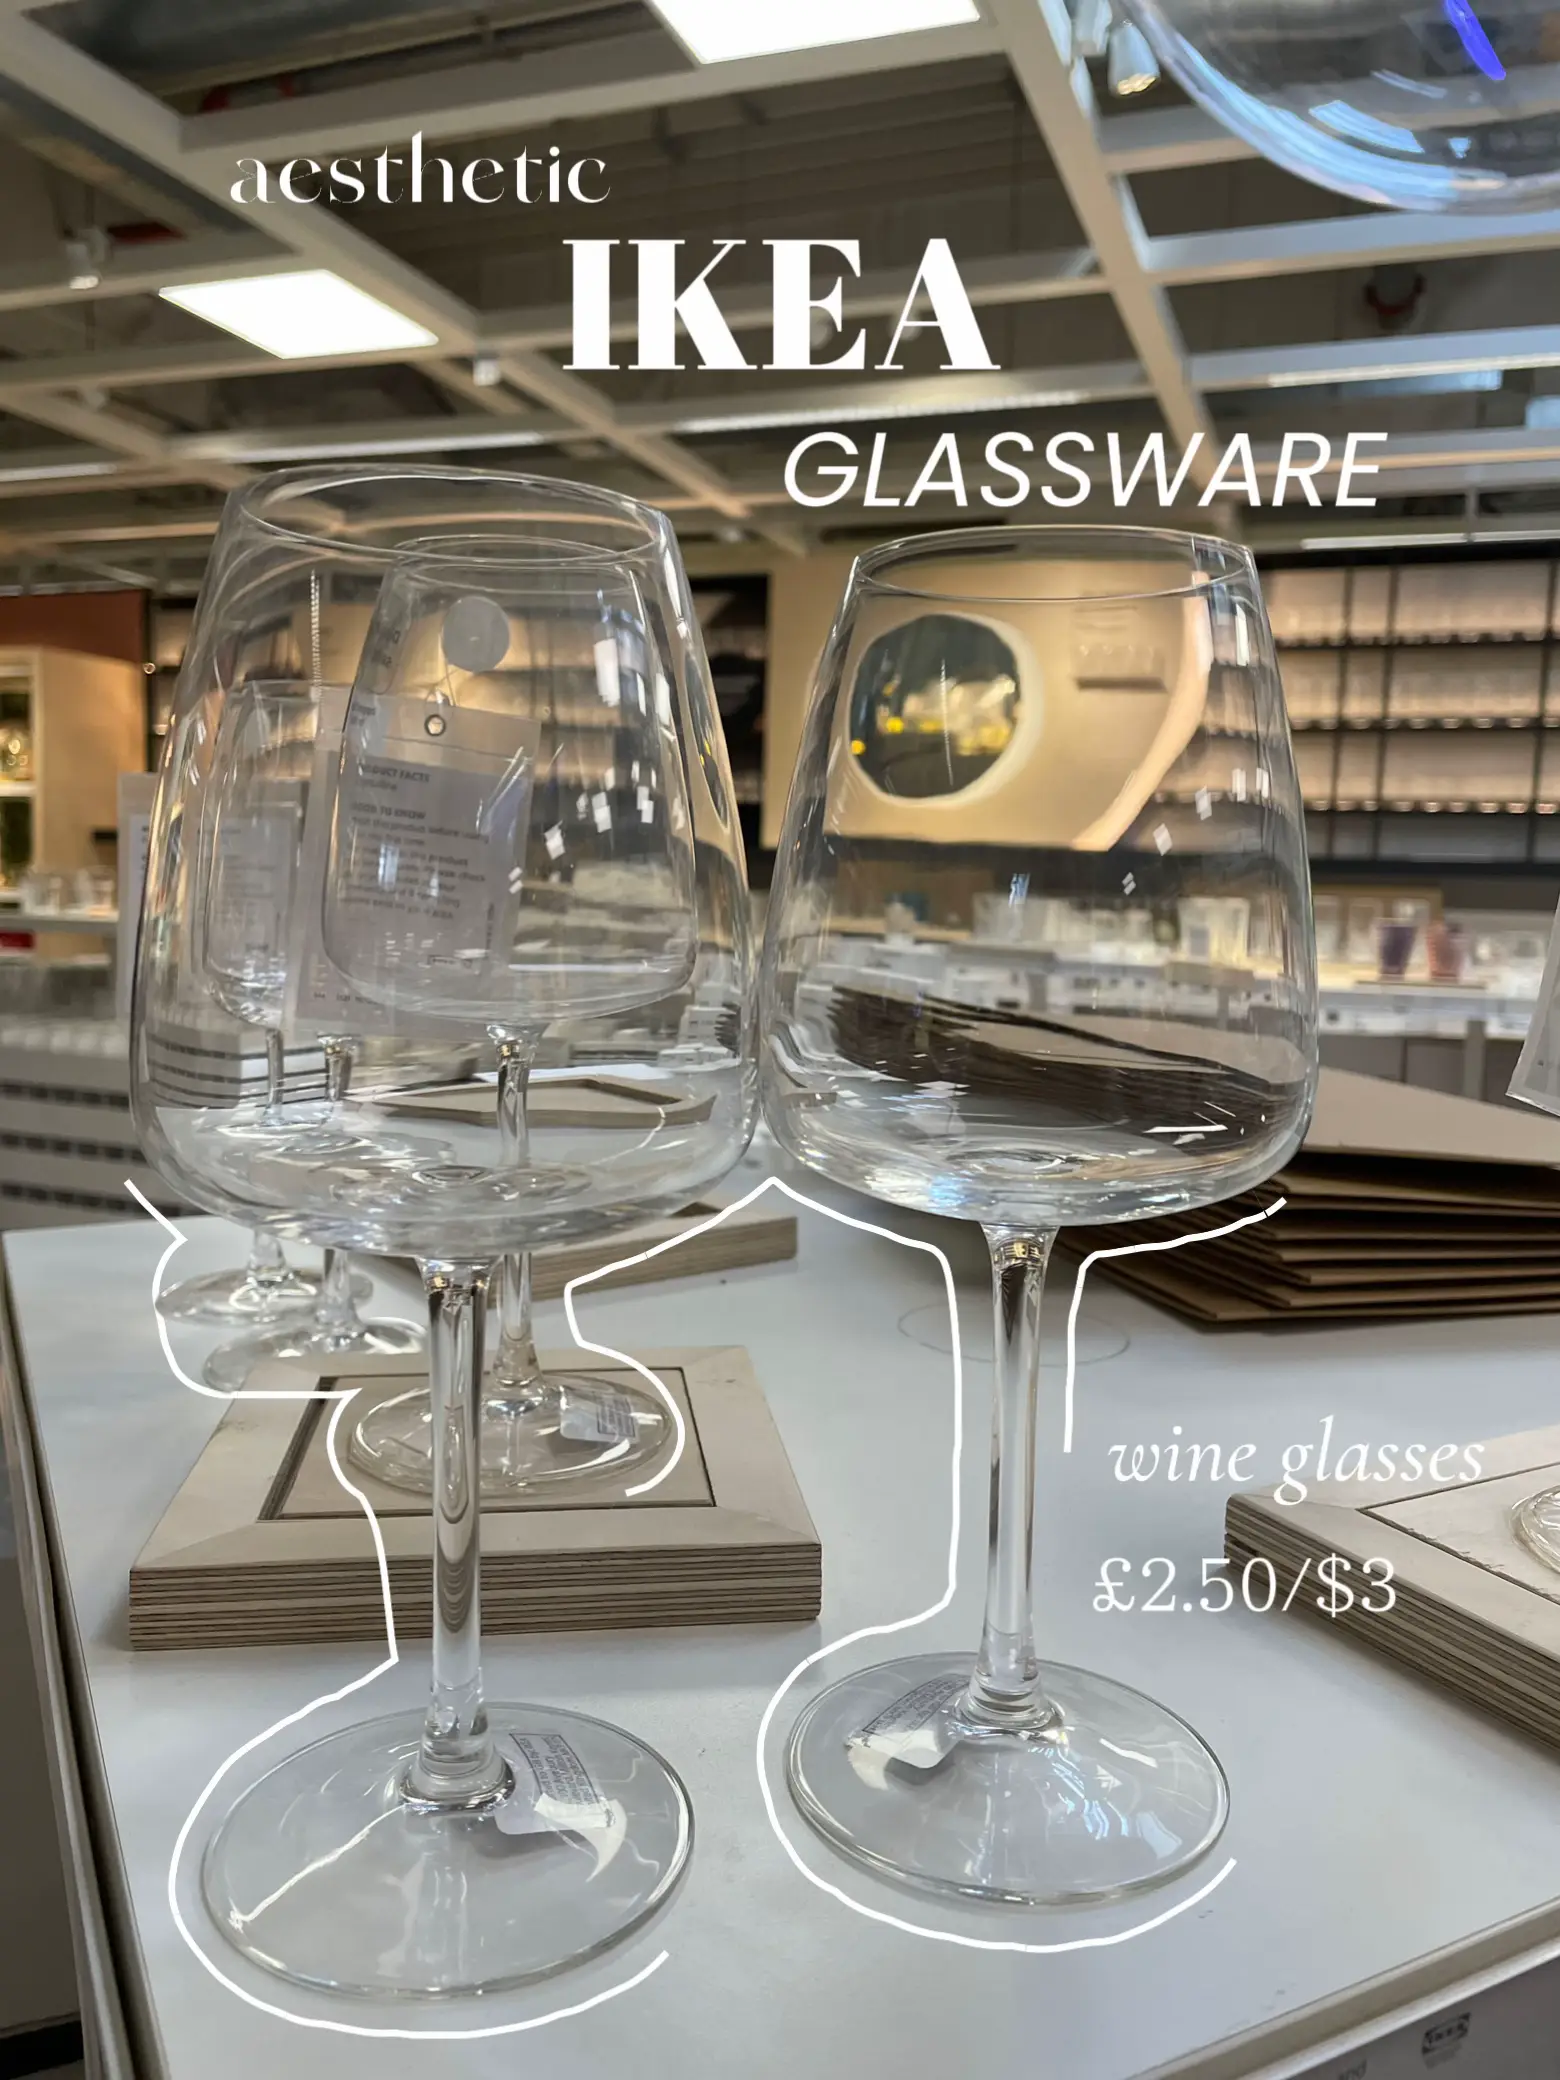 IKEA aesthetic glassware, Gallery posted by woman.of.gold